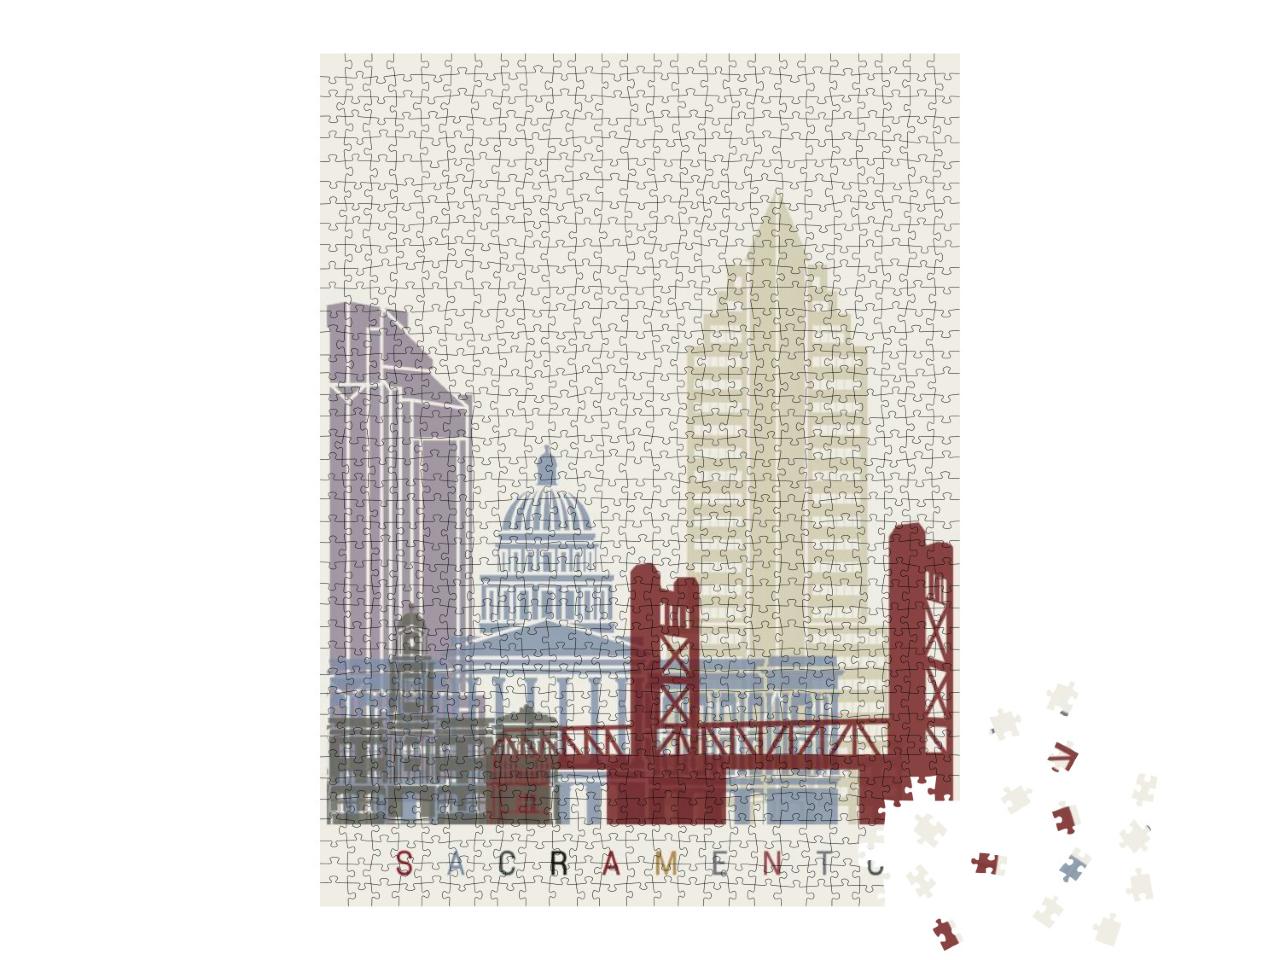 Sacramento Skyline Poster in Editable Vector File... Jigsaw Puzzle with 1000 pieces